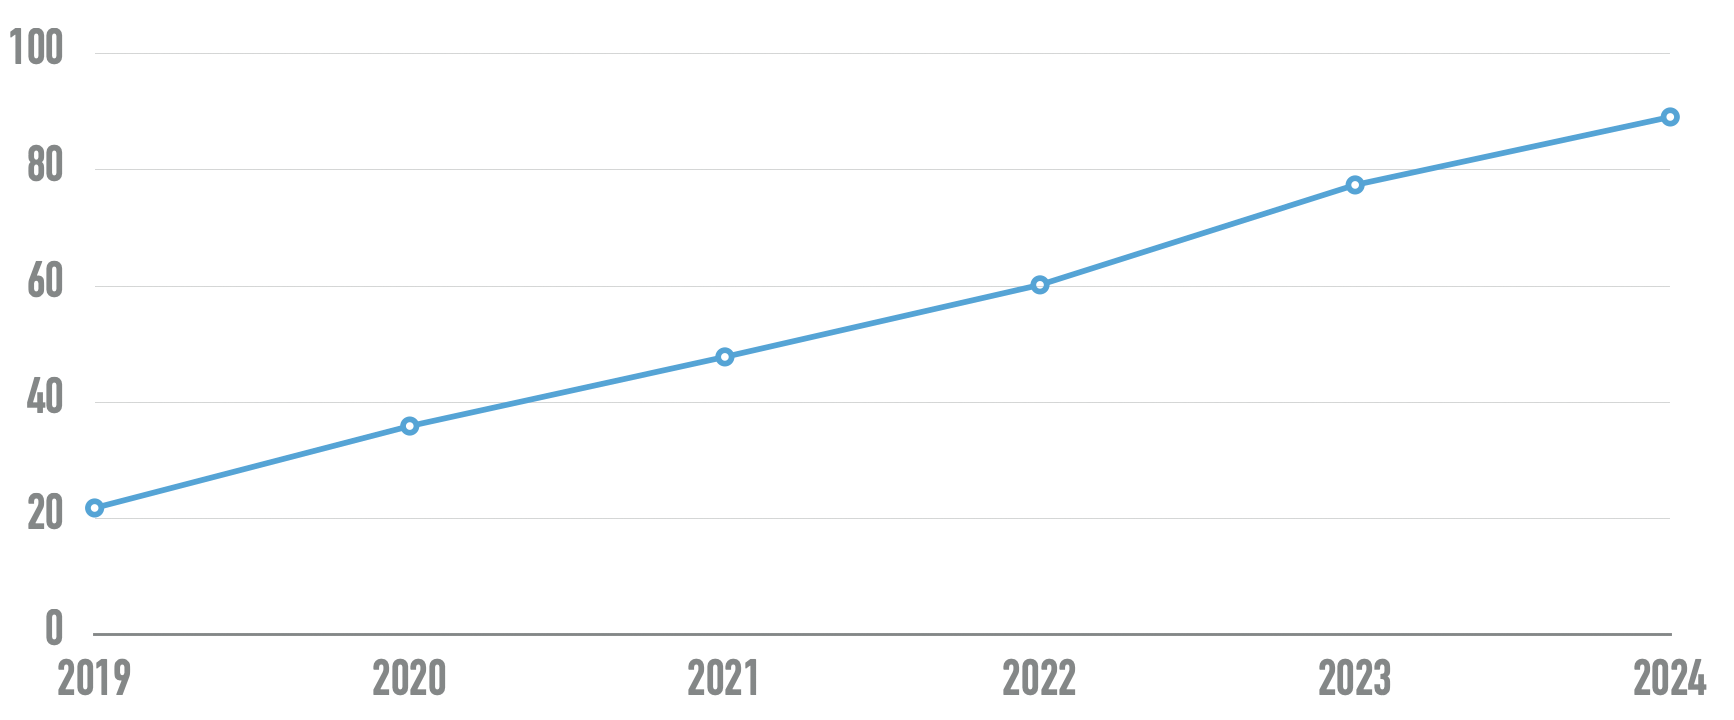 Line chart showing detected ARIA attributes increasing from 22 in 2019 to 89 in 2024.